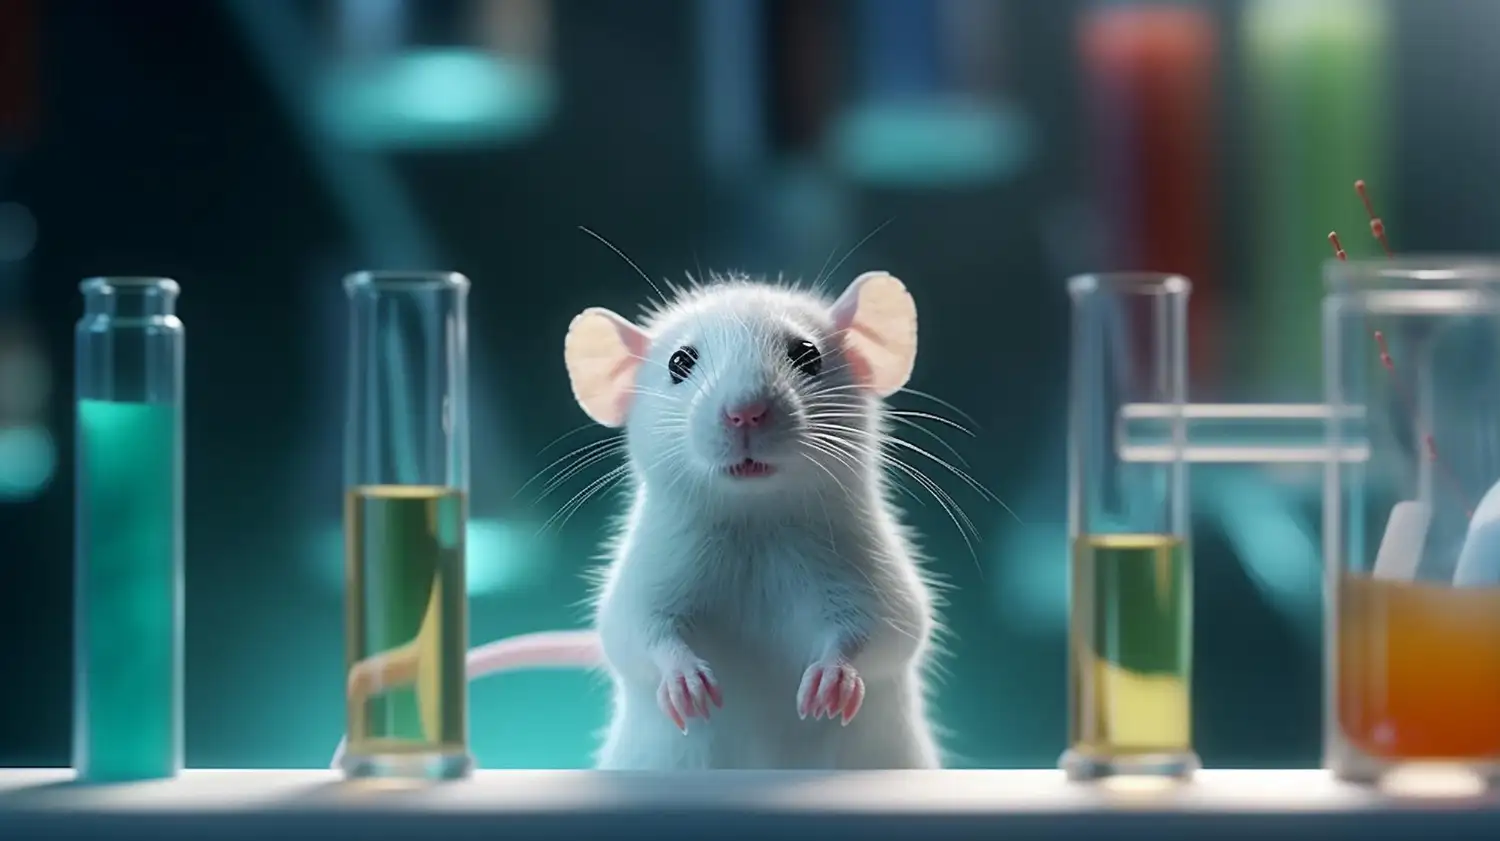 A white laboratory mouse standing on its hind legs with several test tubes next to it